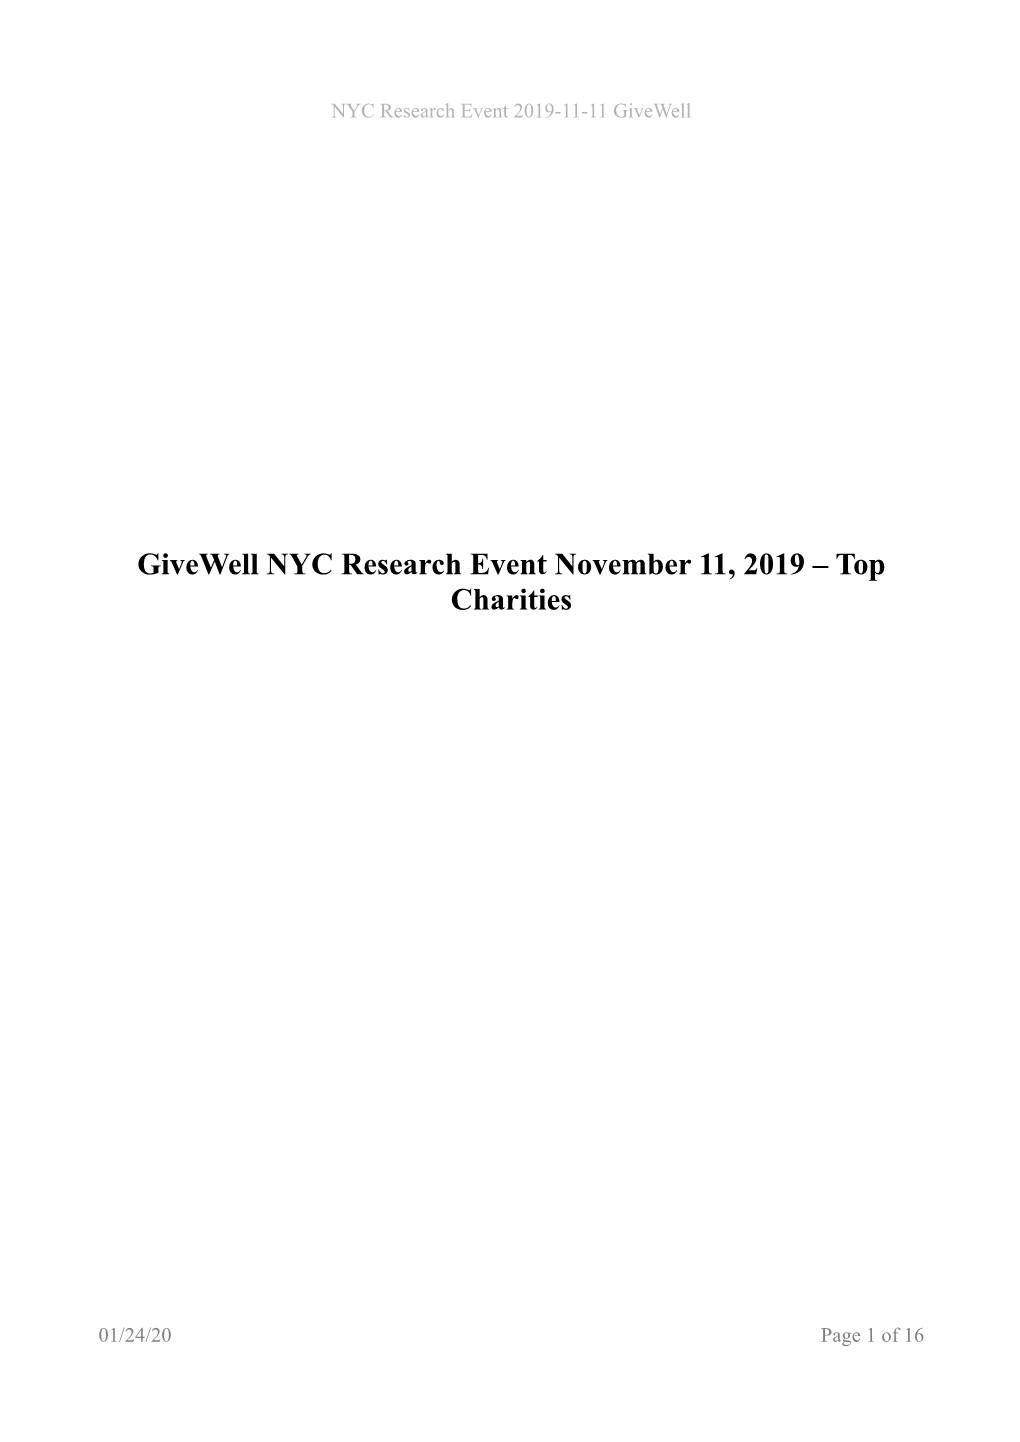 Givewell NYC Research Event November 11, 2019 – Top Charities